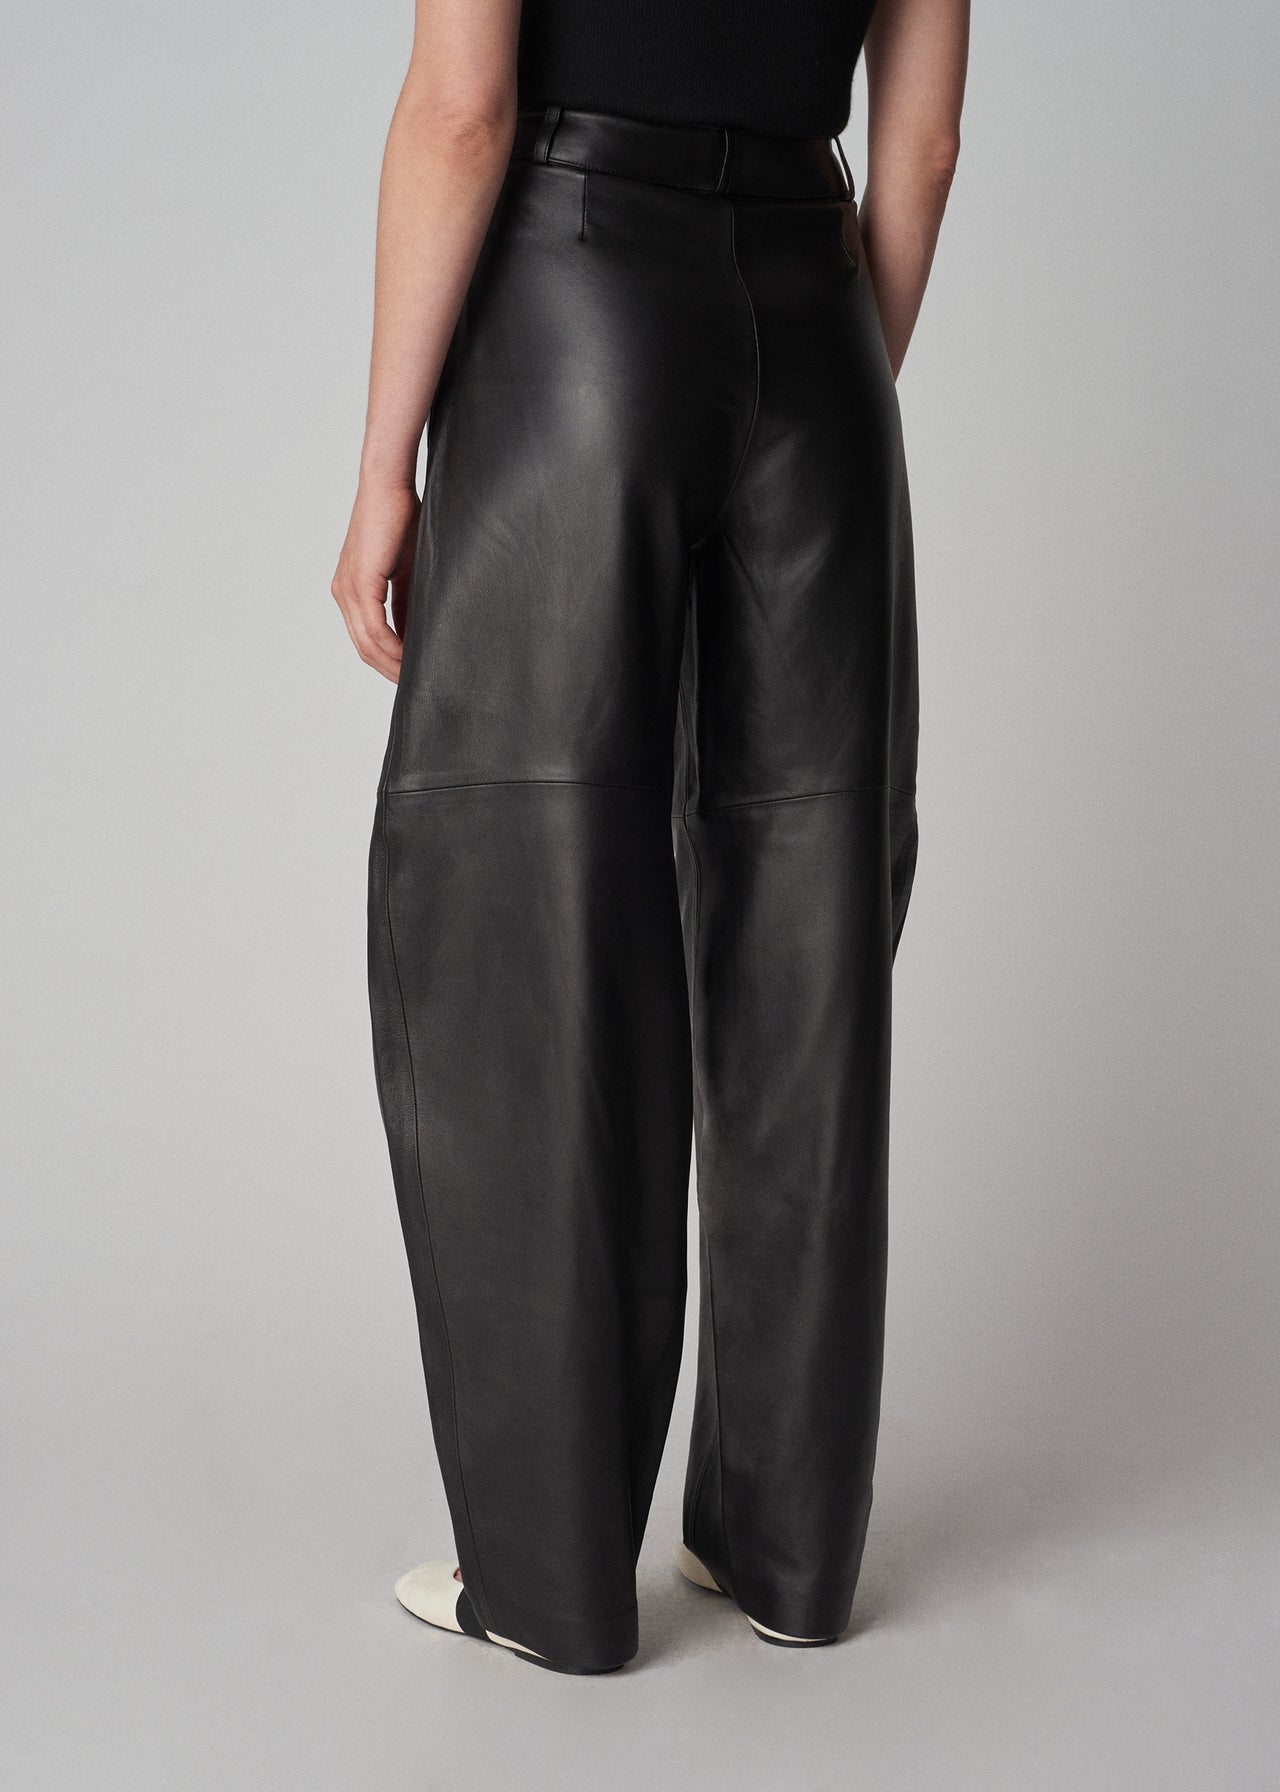 High Waist Curve Seam Pant in Leather - Black - CO